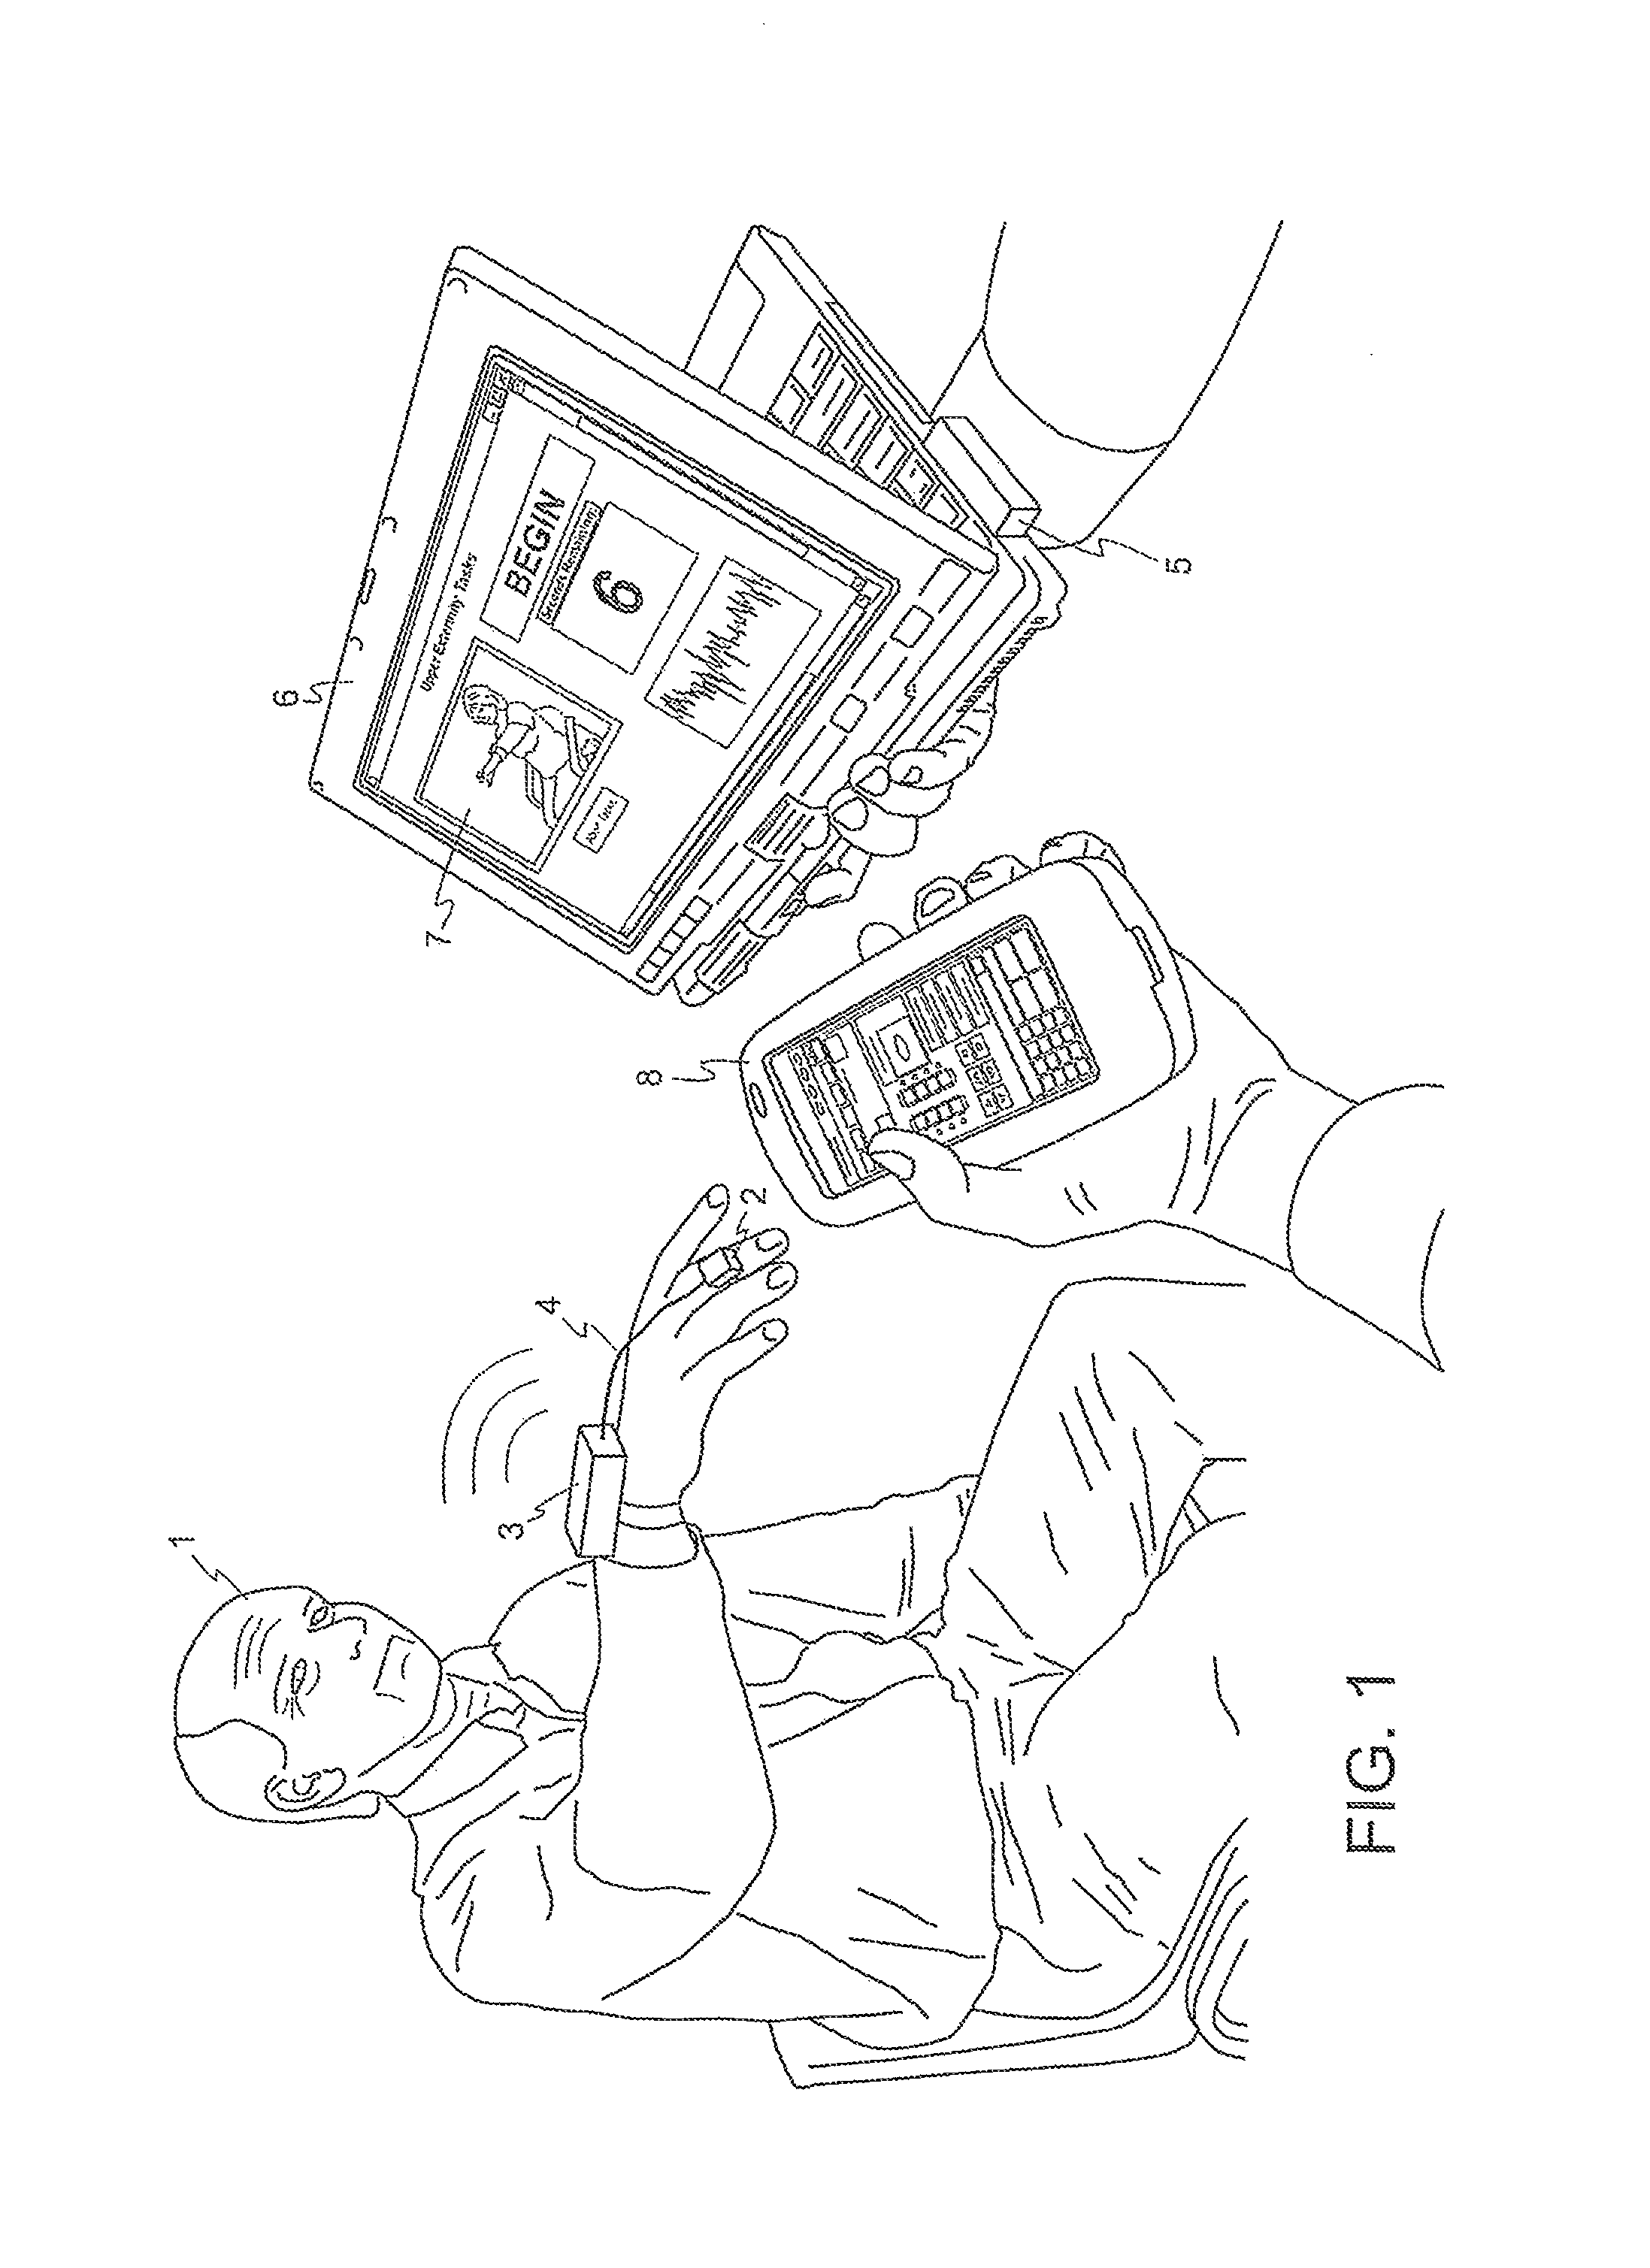 Movement disorder therapy system and methods of tuning remotely, intelligently and/or automatically